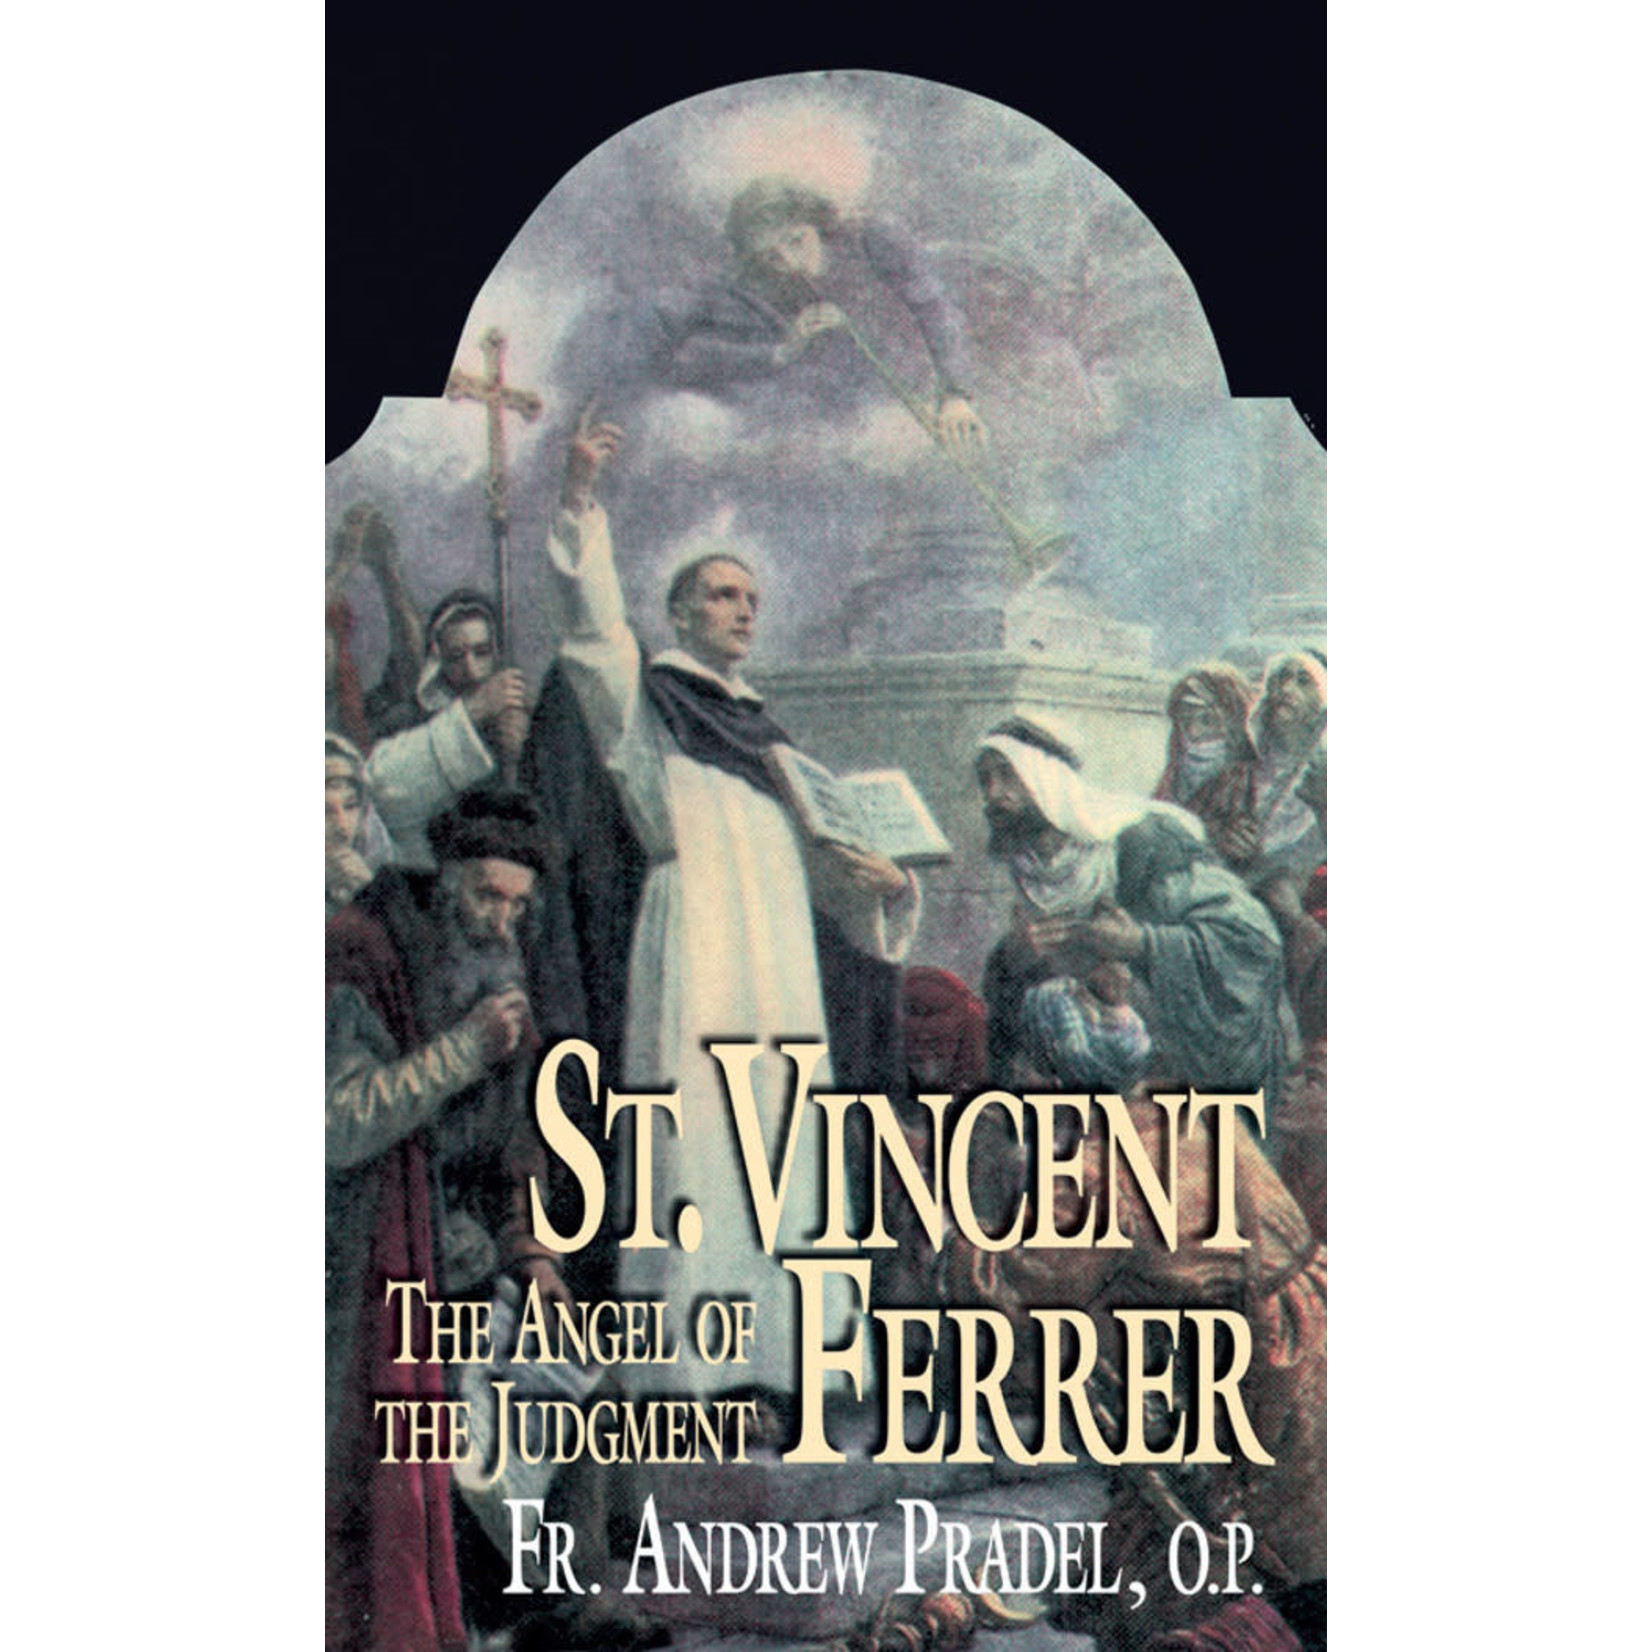 St Vincent Ferrer-The Angel of the Judgment